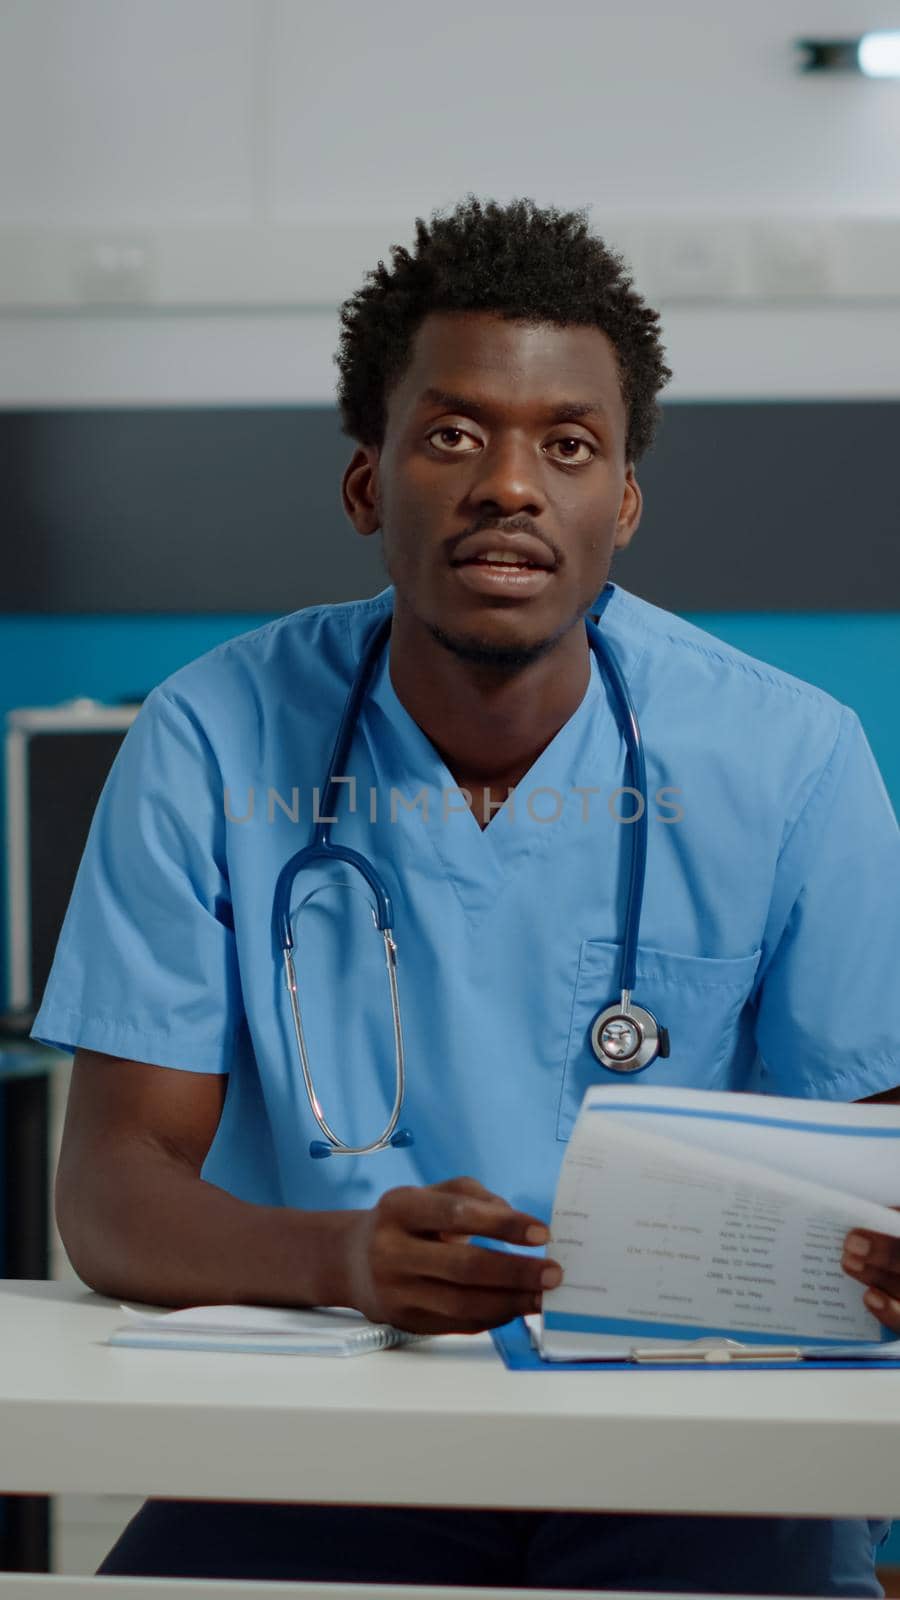 Man nurse talking on video call technology while sitting at desk by DCStudio